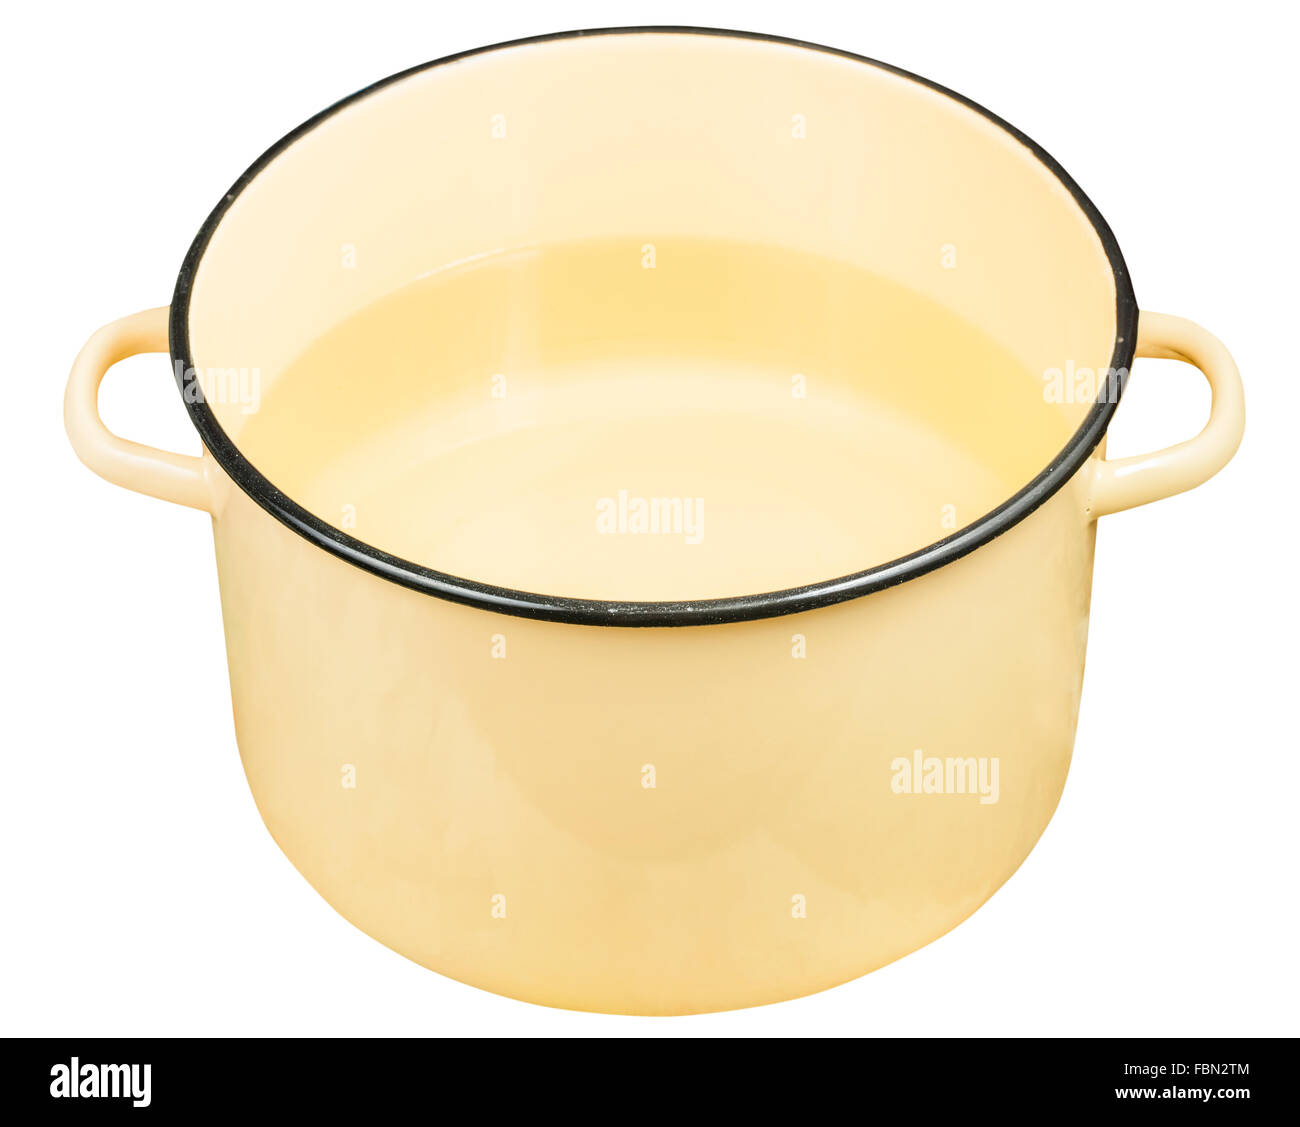 classic yellow enamel saucepot with water isolated on white background Stock Photo